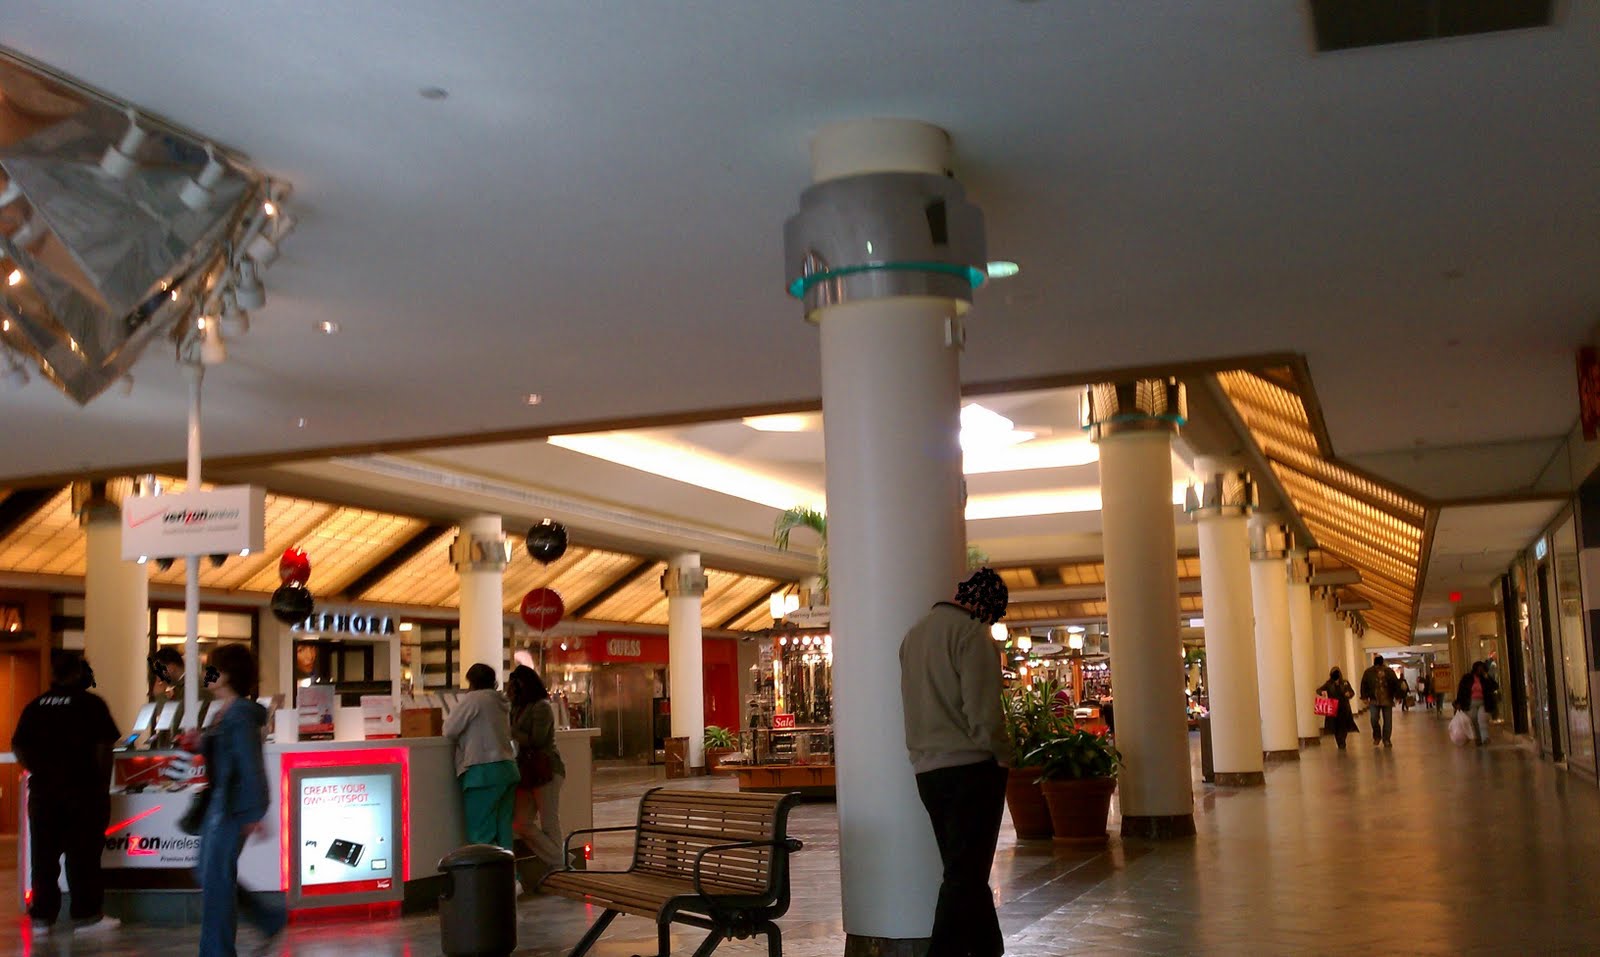 ... Malls and Retail: Lakeside Shopping Center Mall 2012 Metairie LA